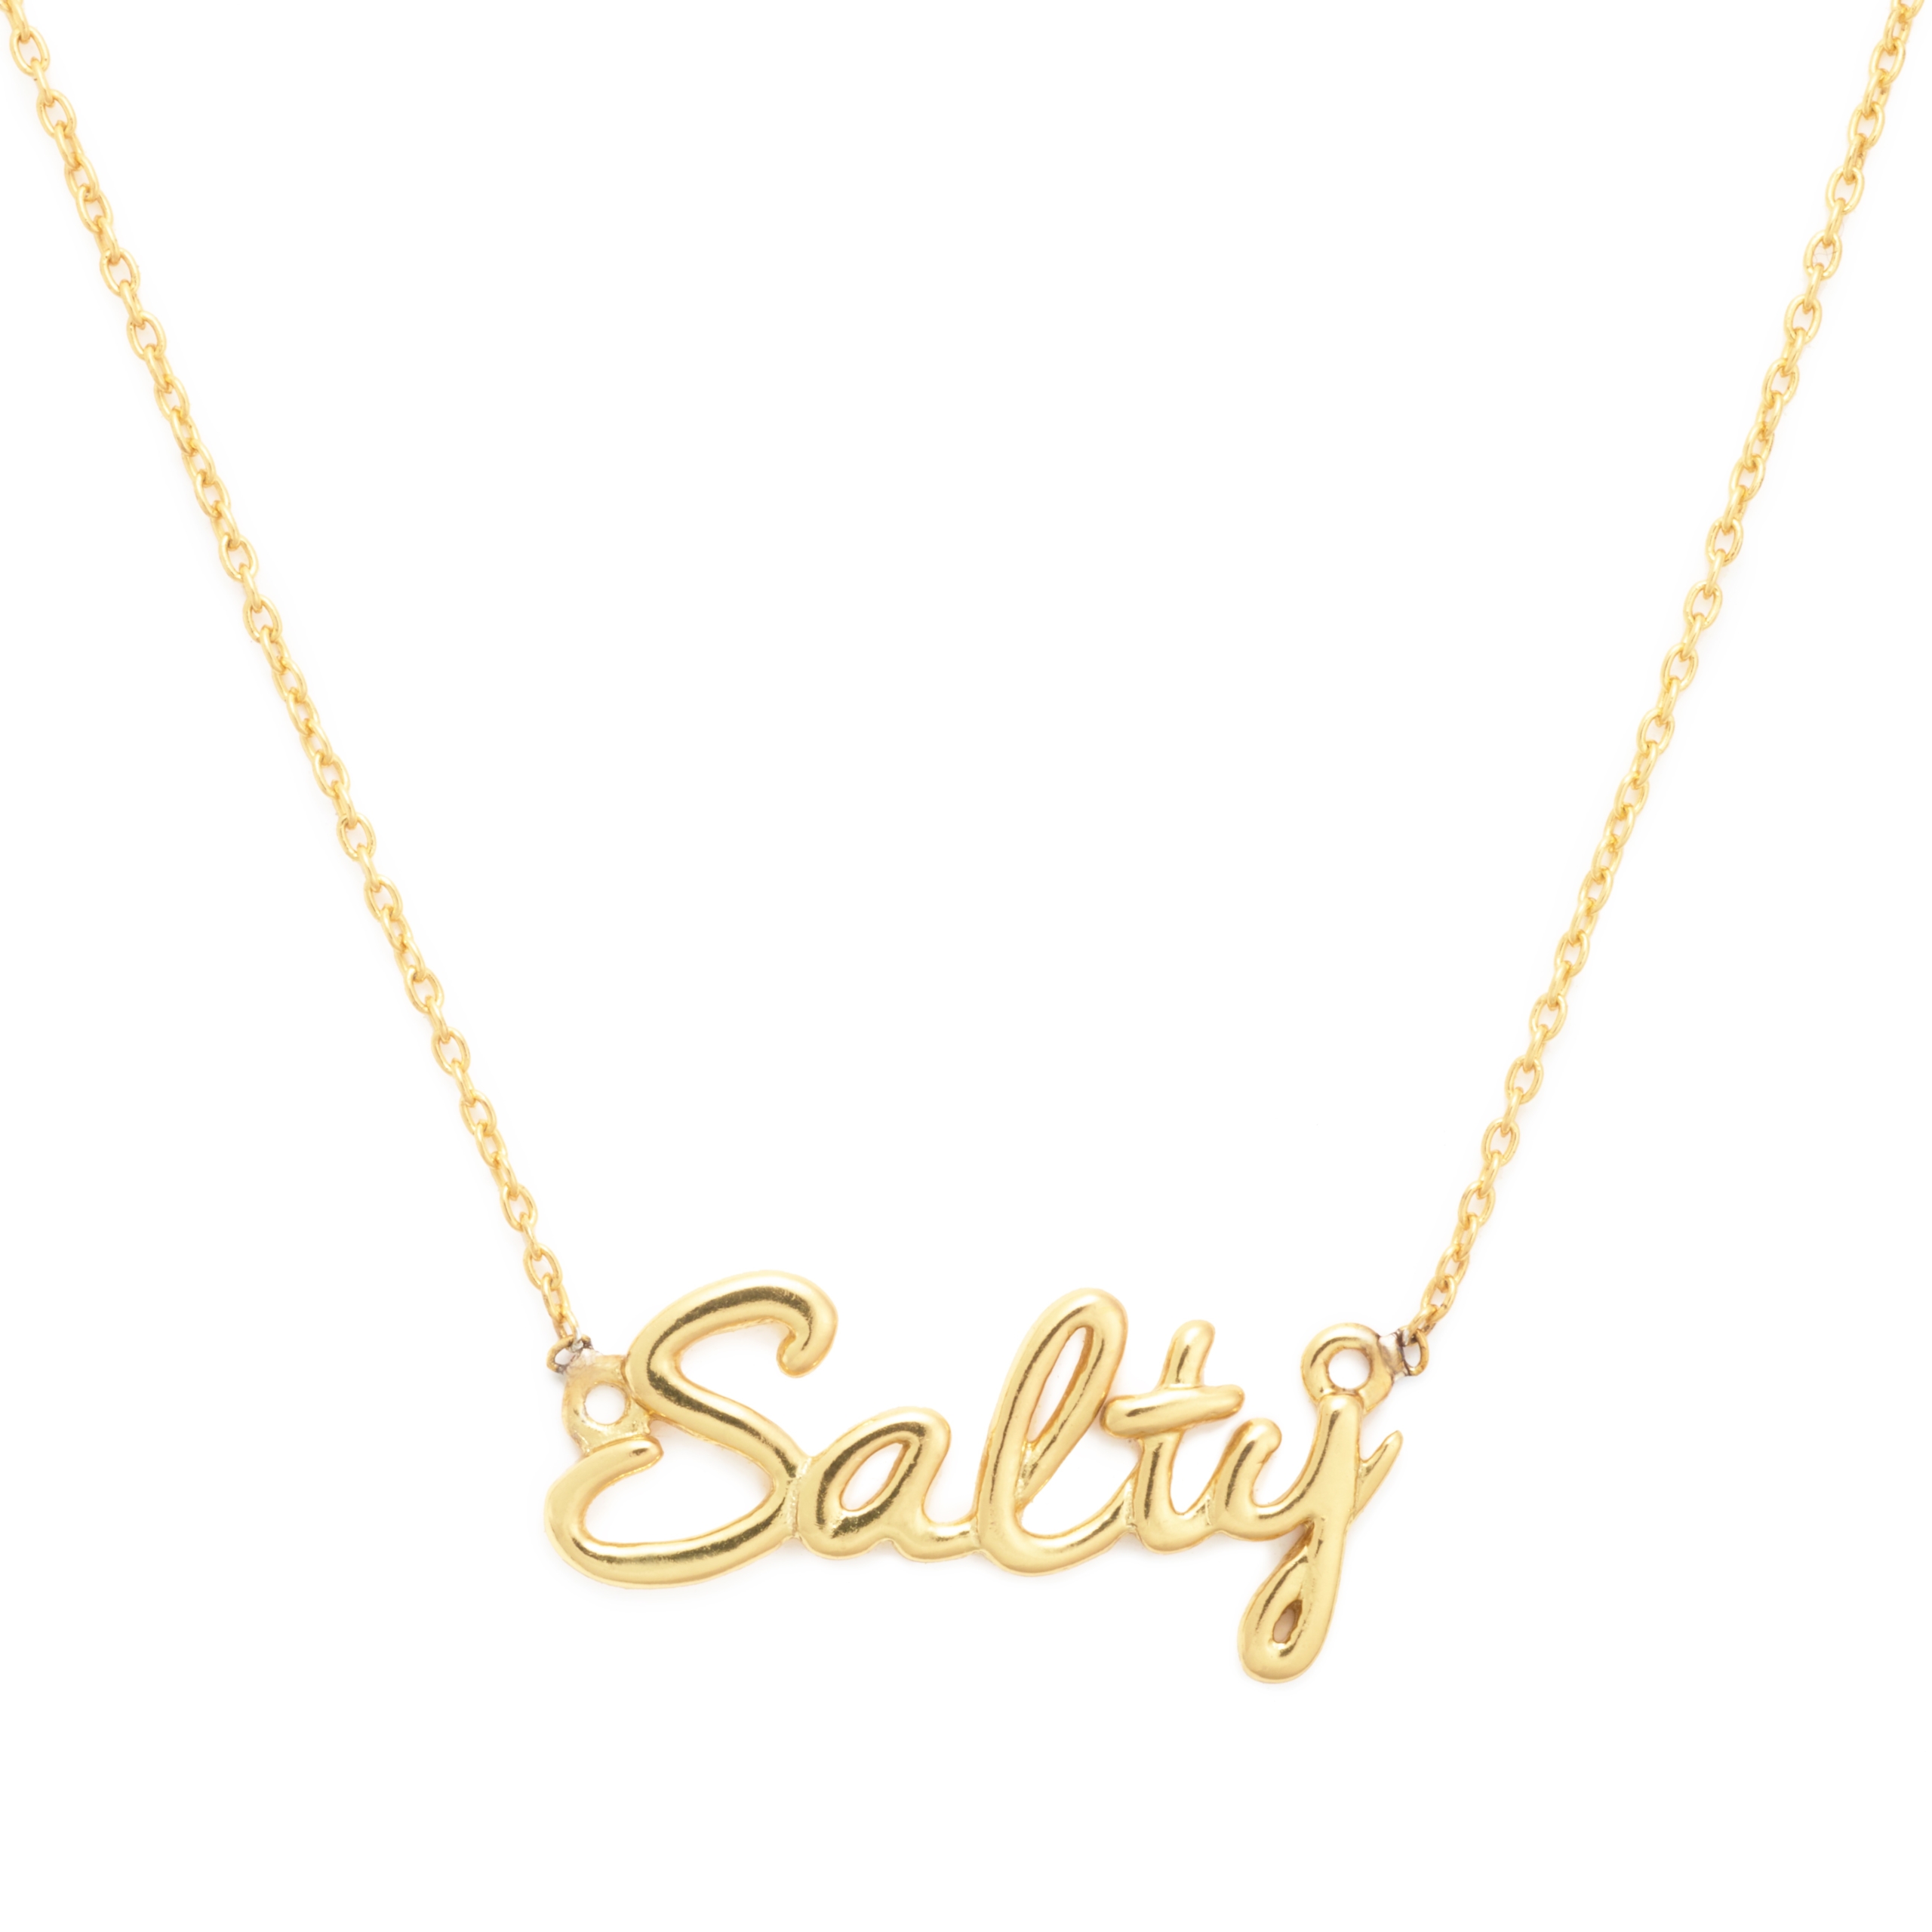 Salty Necklace, Yellow Gold Plated